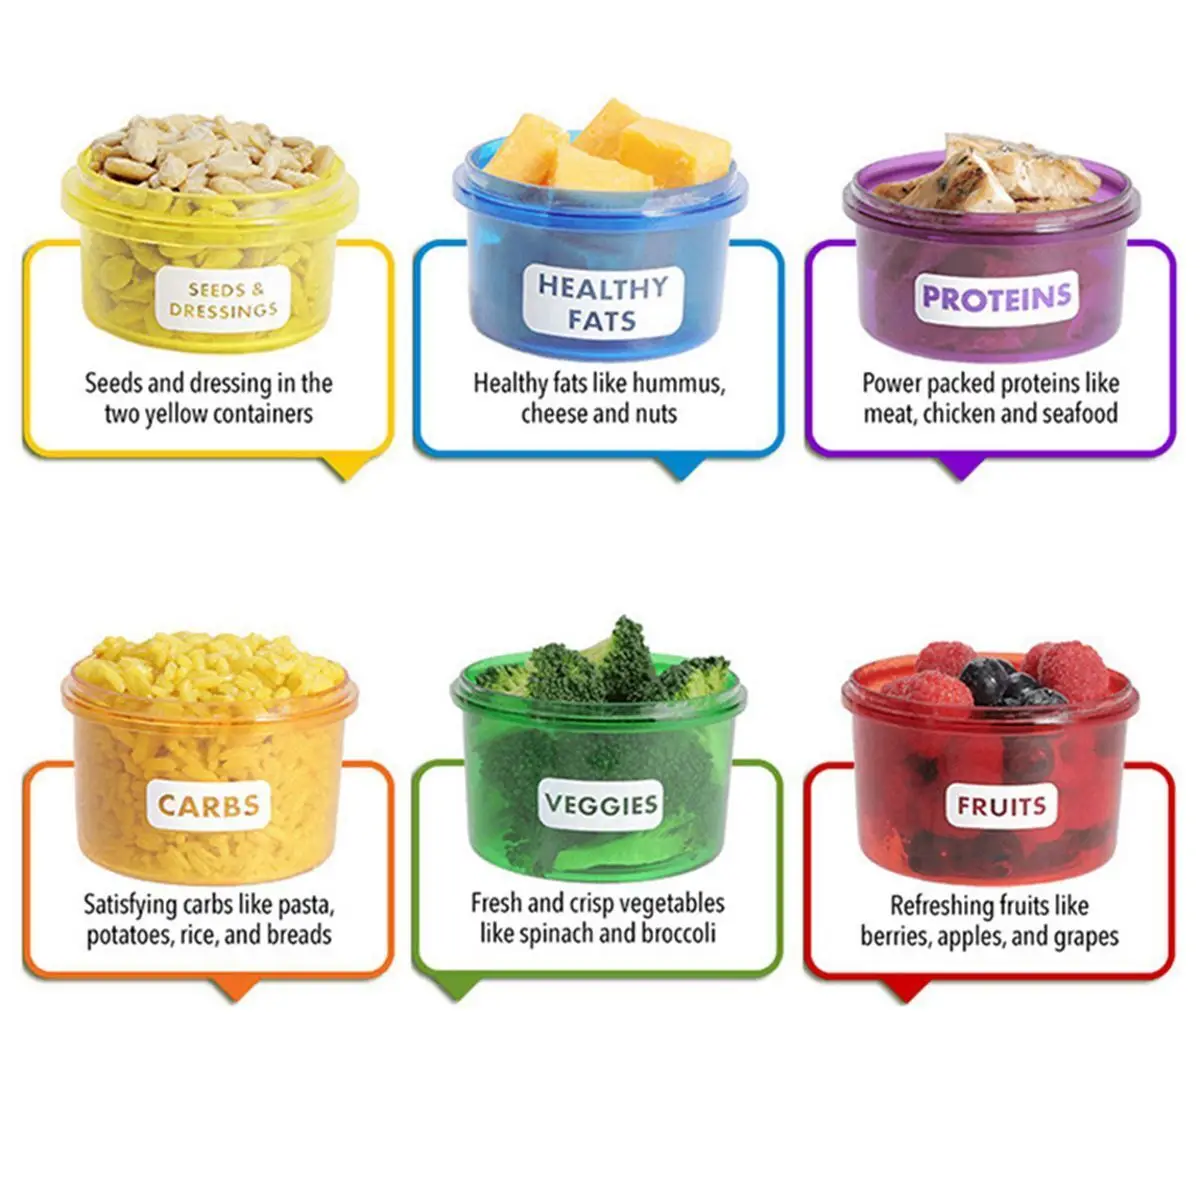 https://ae01.alicdn.com/kf/Sf1ad9758d24e4bfbbdcceaaf70275a9e3/7Pcs-set-Portion-Control-Food-Box-Prep-Storage-Container-Fitness-Workout-Meal-Eating-Plan-Plastic-Food.jpg